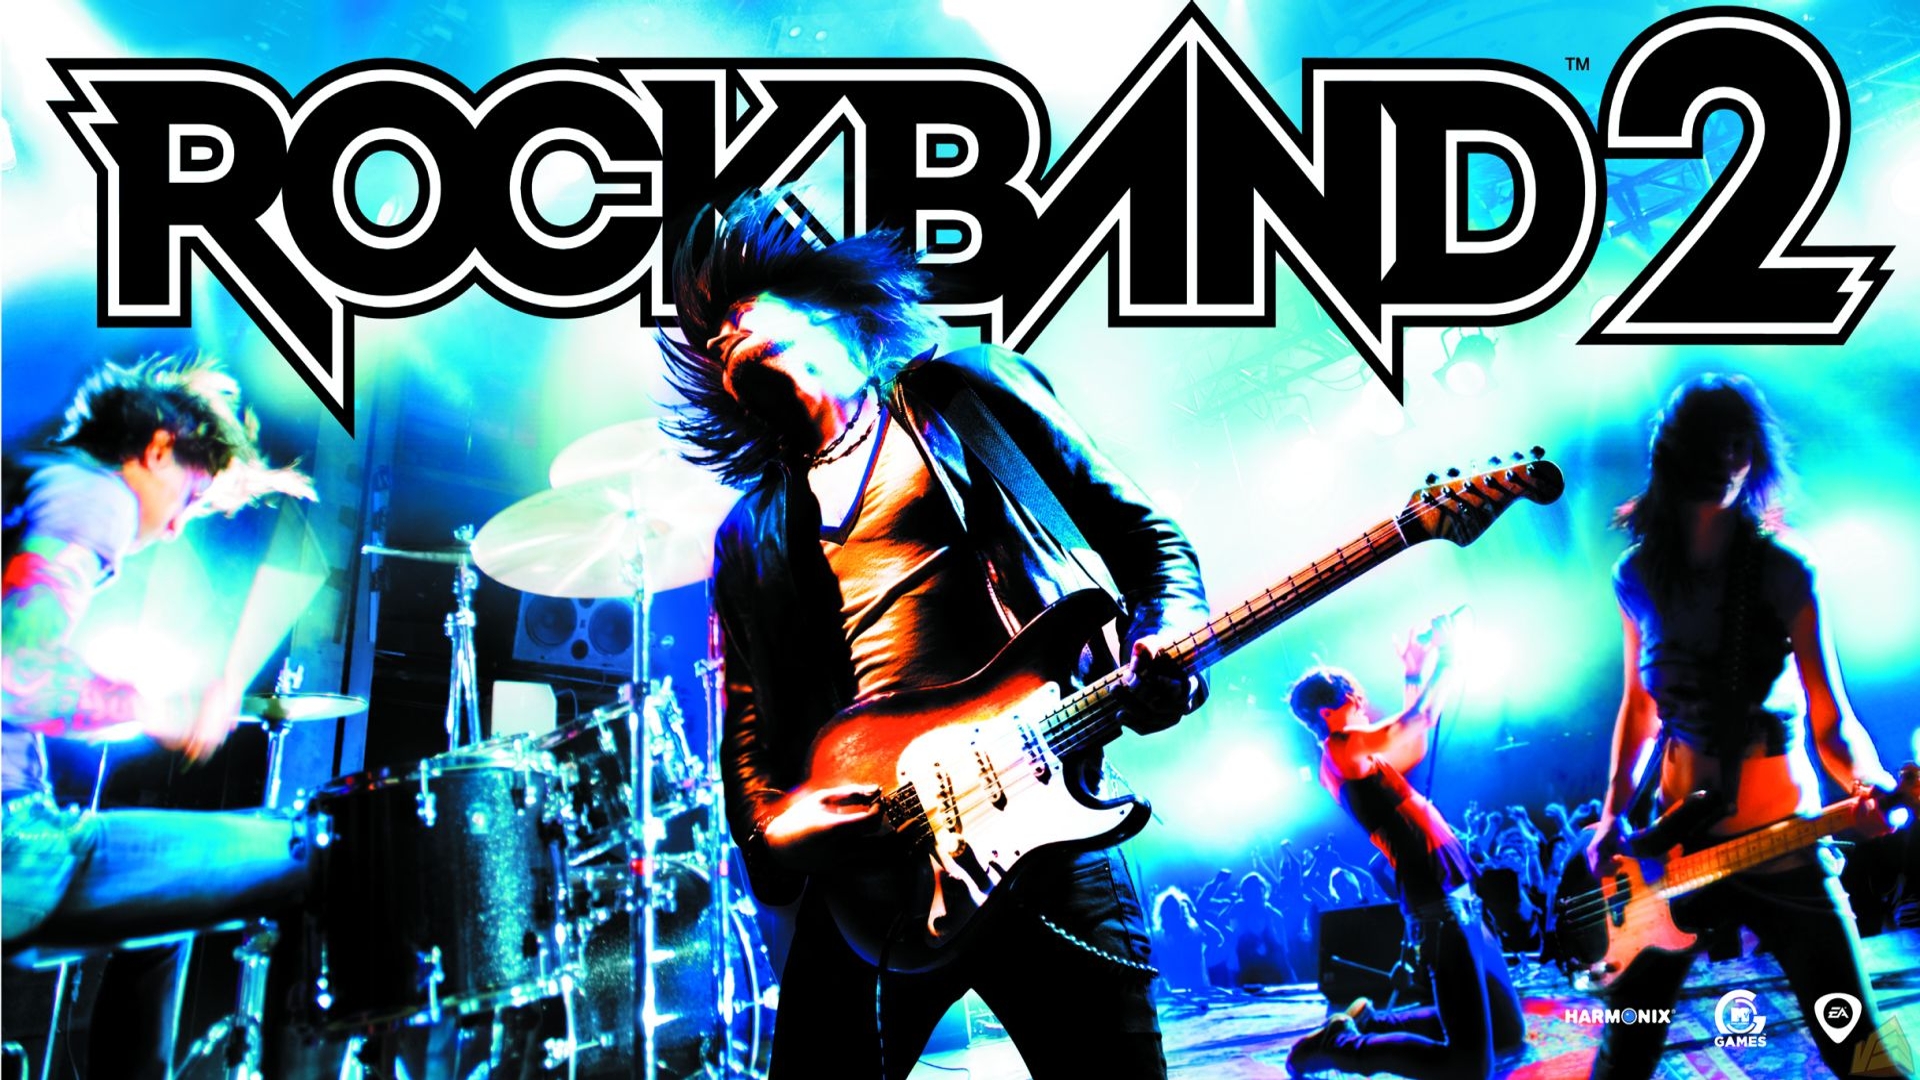 Gallery For gt Rock Band 3 Wallpaper